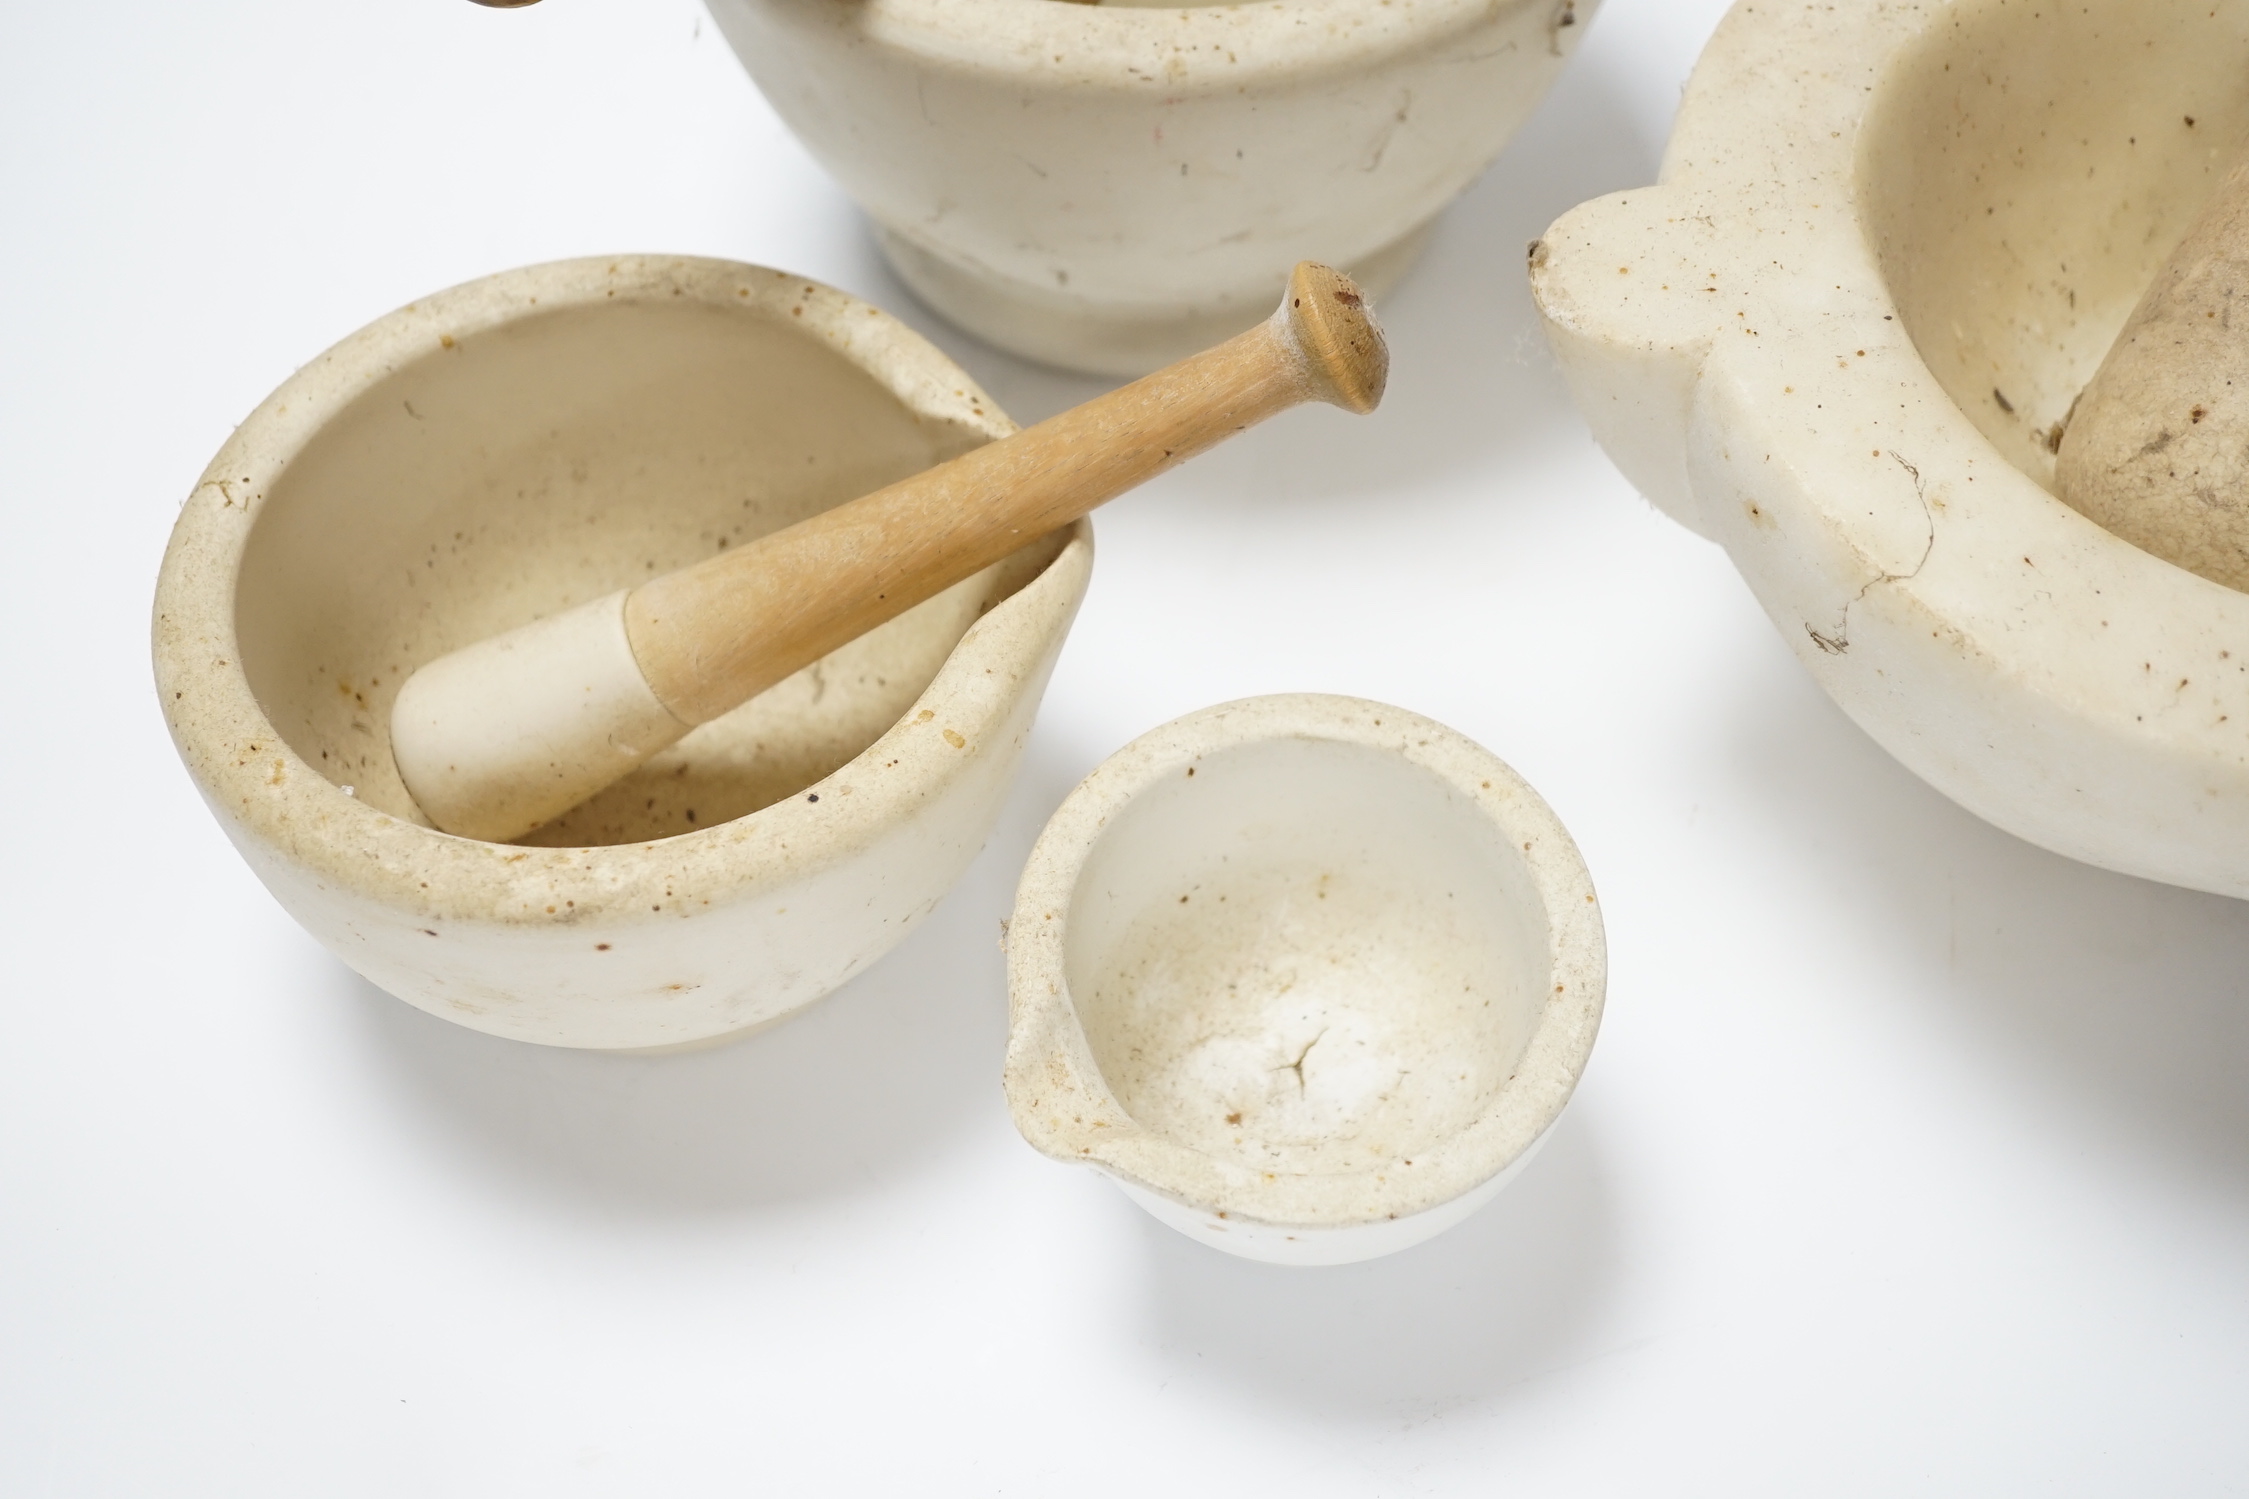 Four mortars and three pestles, largest 23cm wide